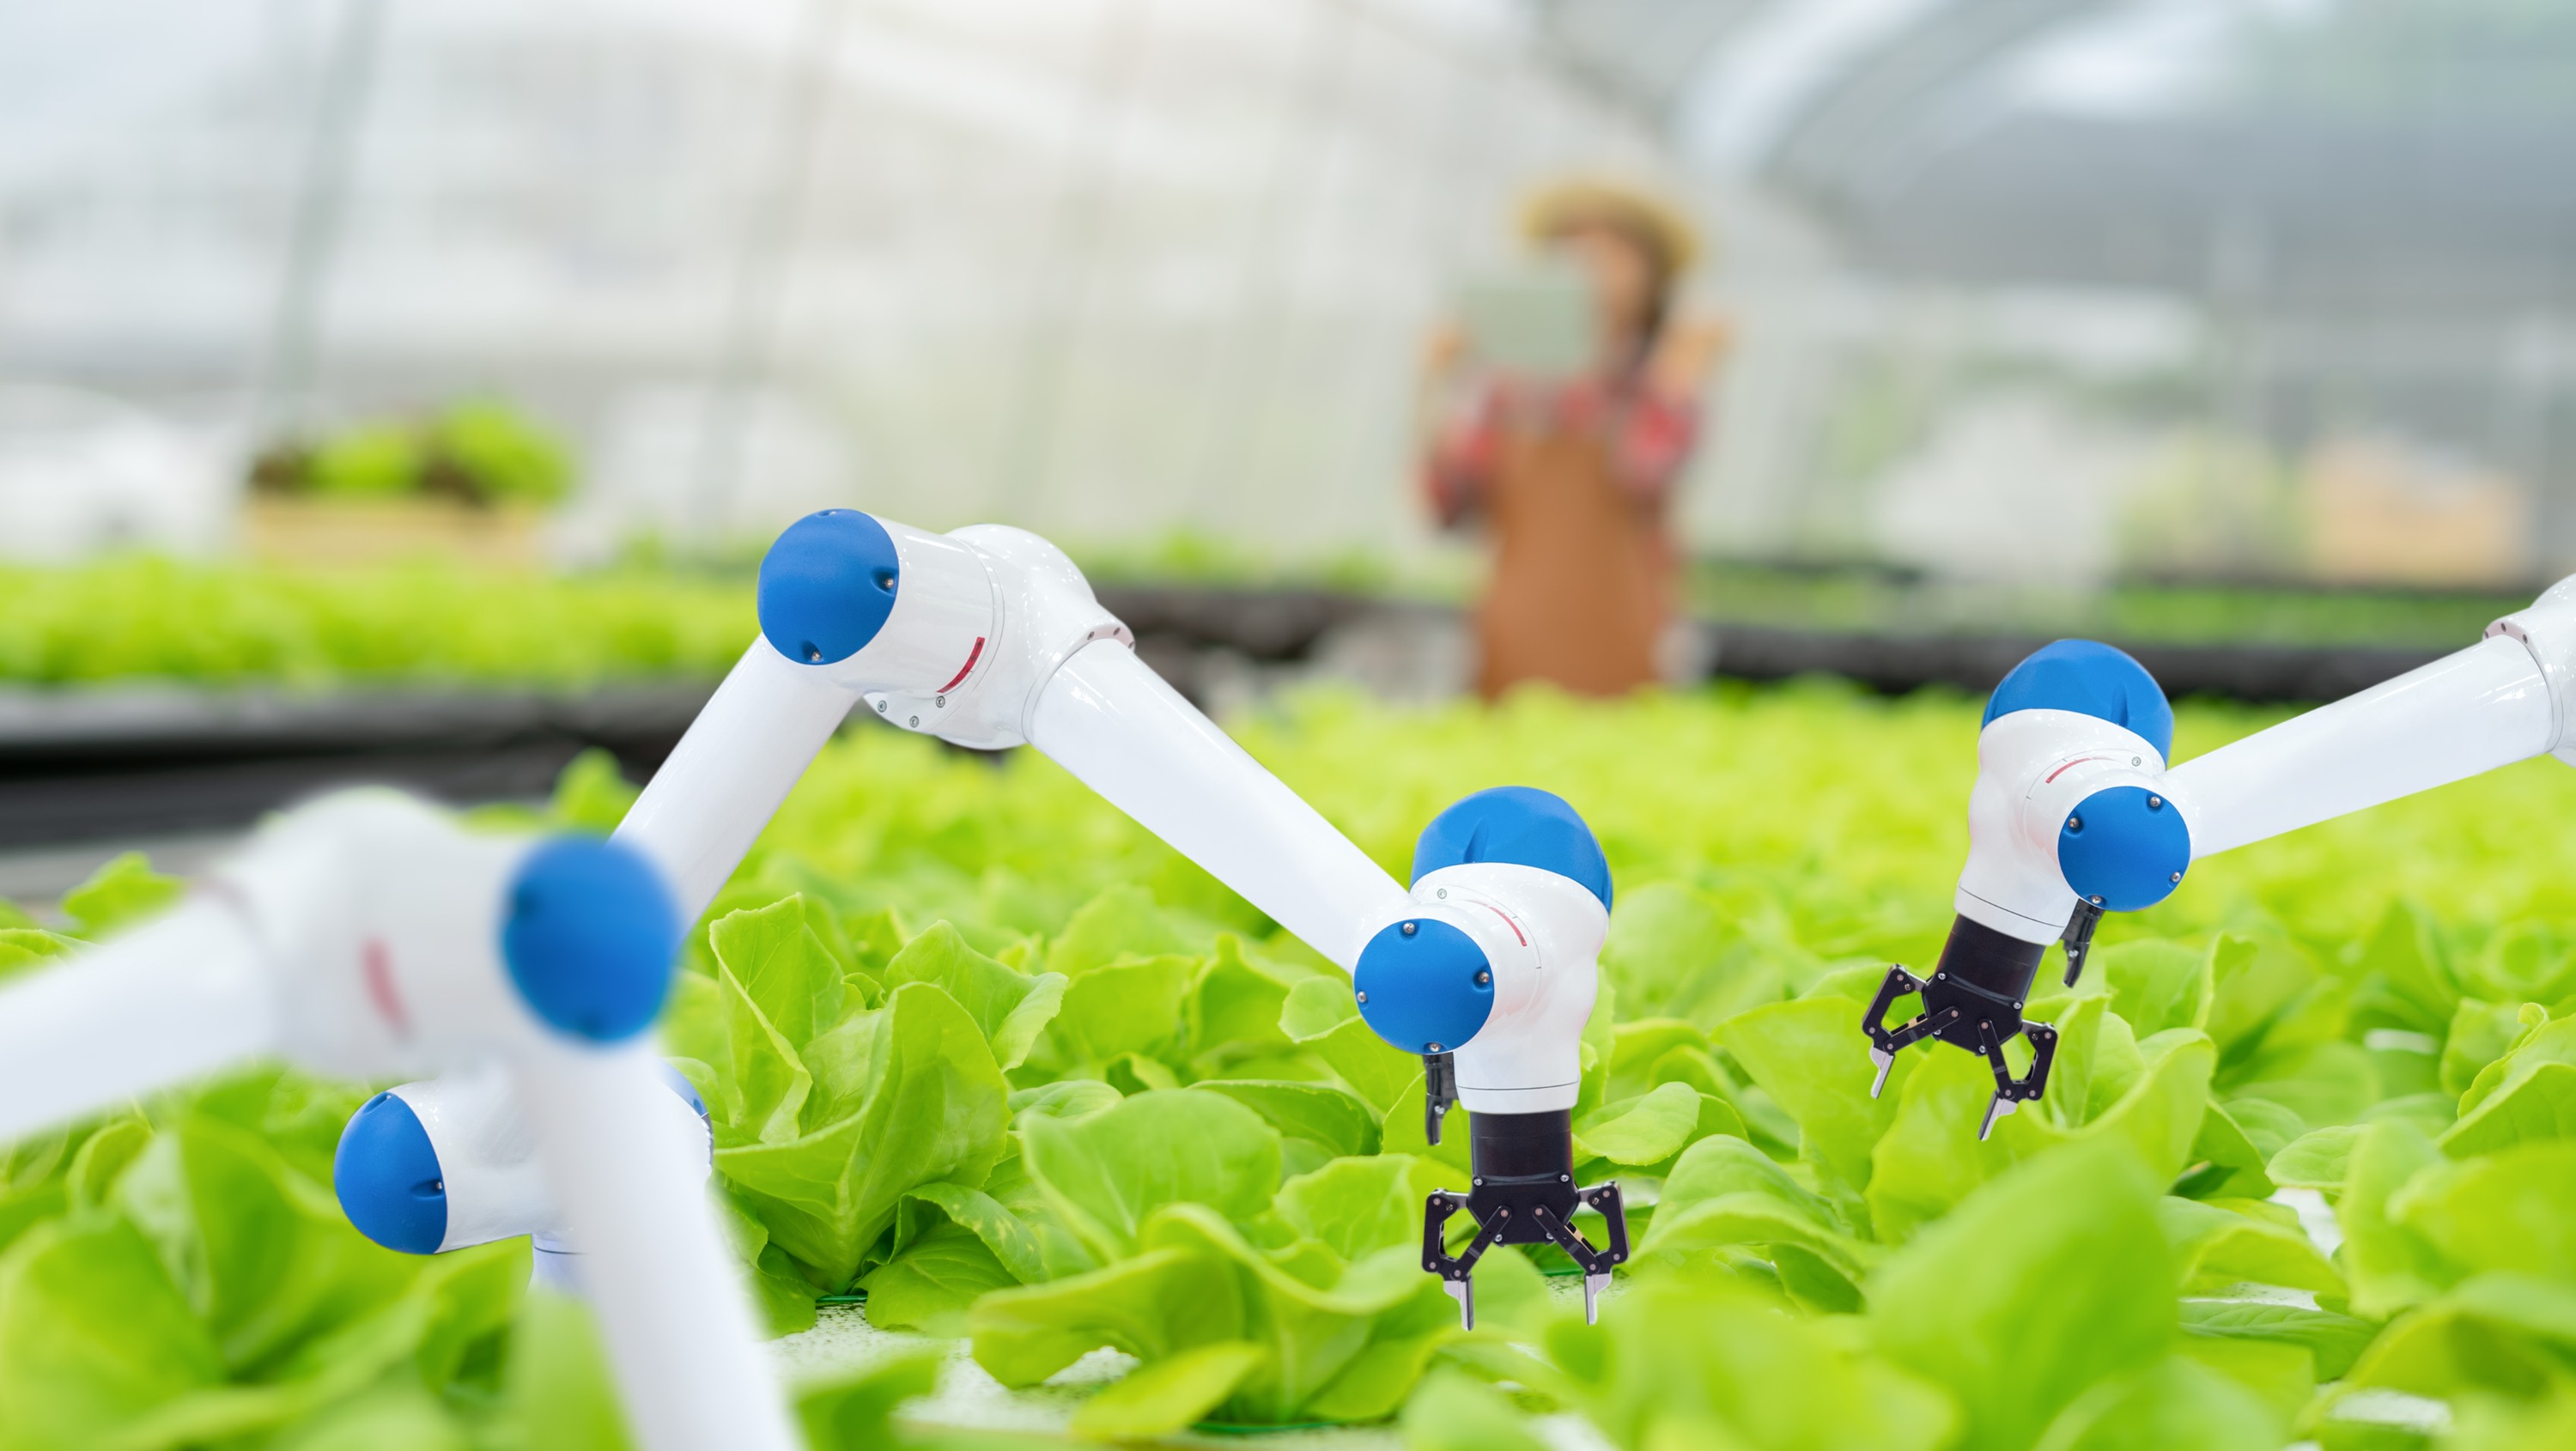 A new partnership between the U of A and leading Silicon Valley firm SVG Ventures|THRIVE will help spur innovation and strengthen competitiveness in Alberta’s agriculture and food sectors. (Photo: Getty Images)